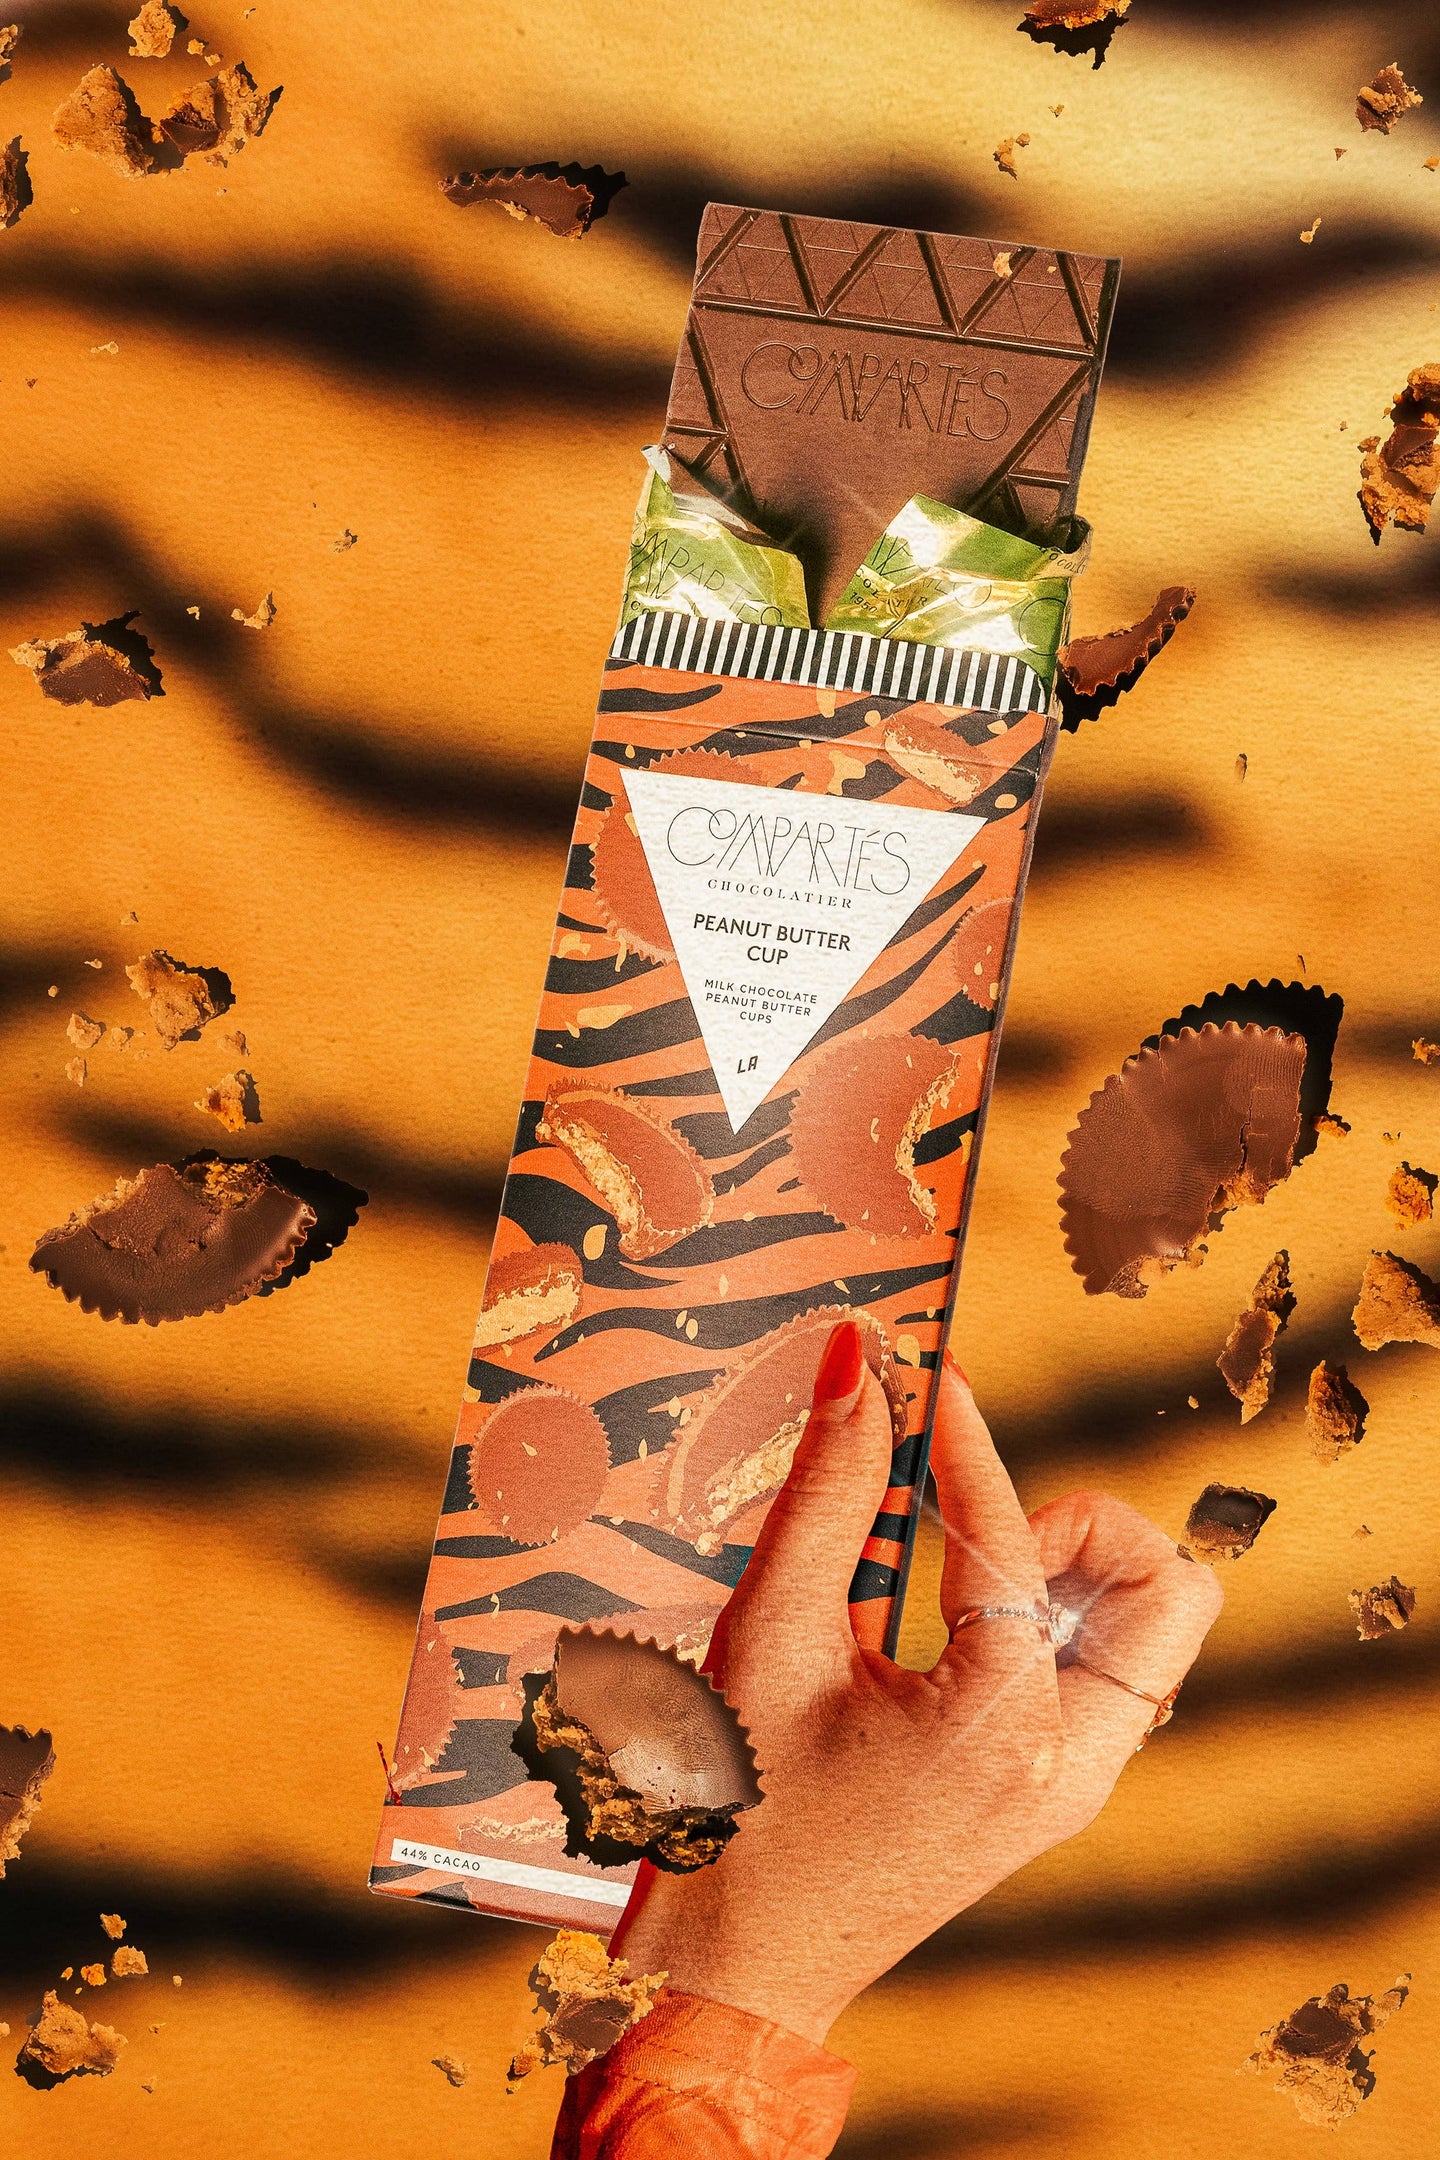 Compartes Chocolate - *NEW* PEANUT BUTTER CUP CHOCOLATE Bar